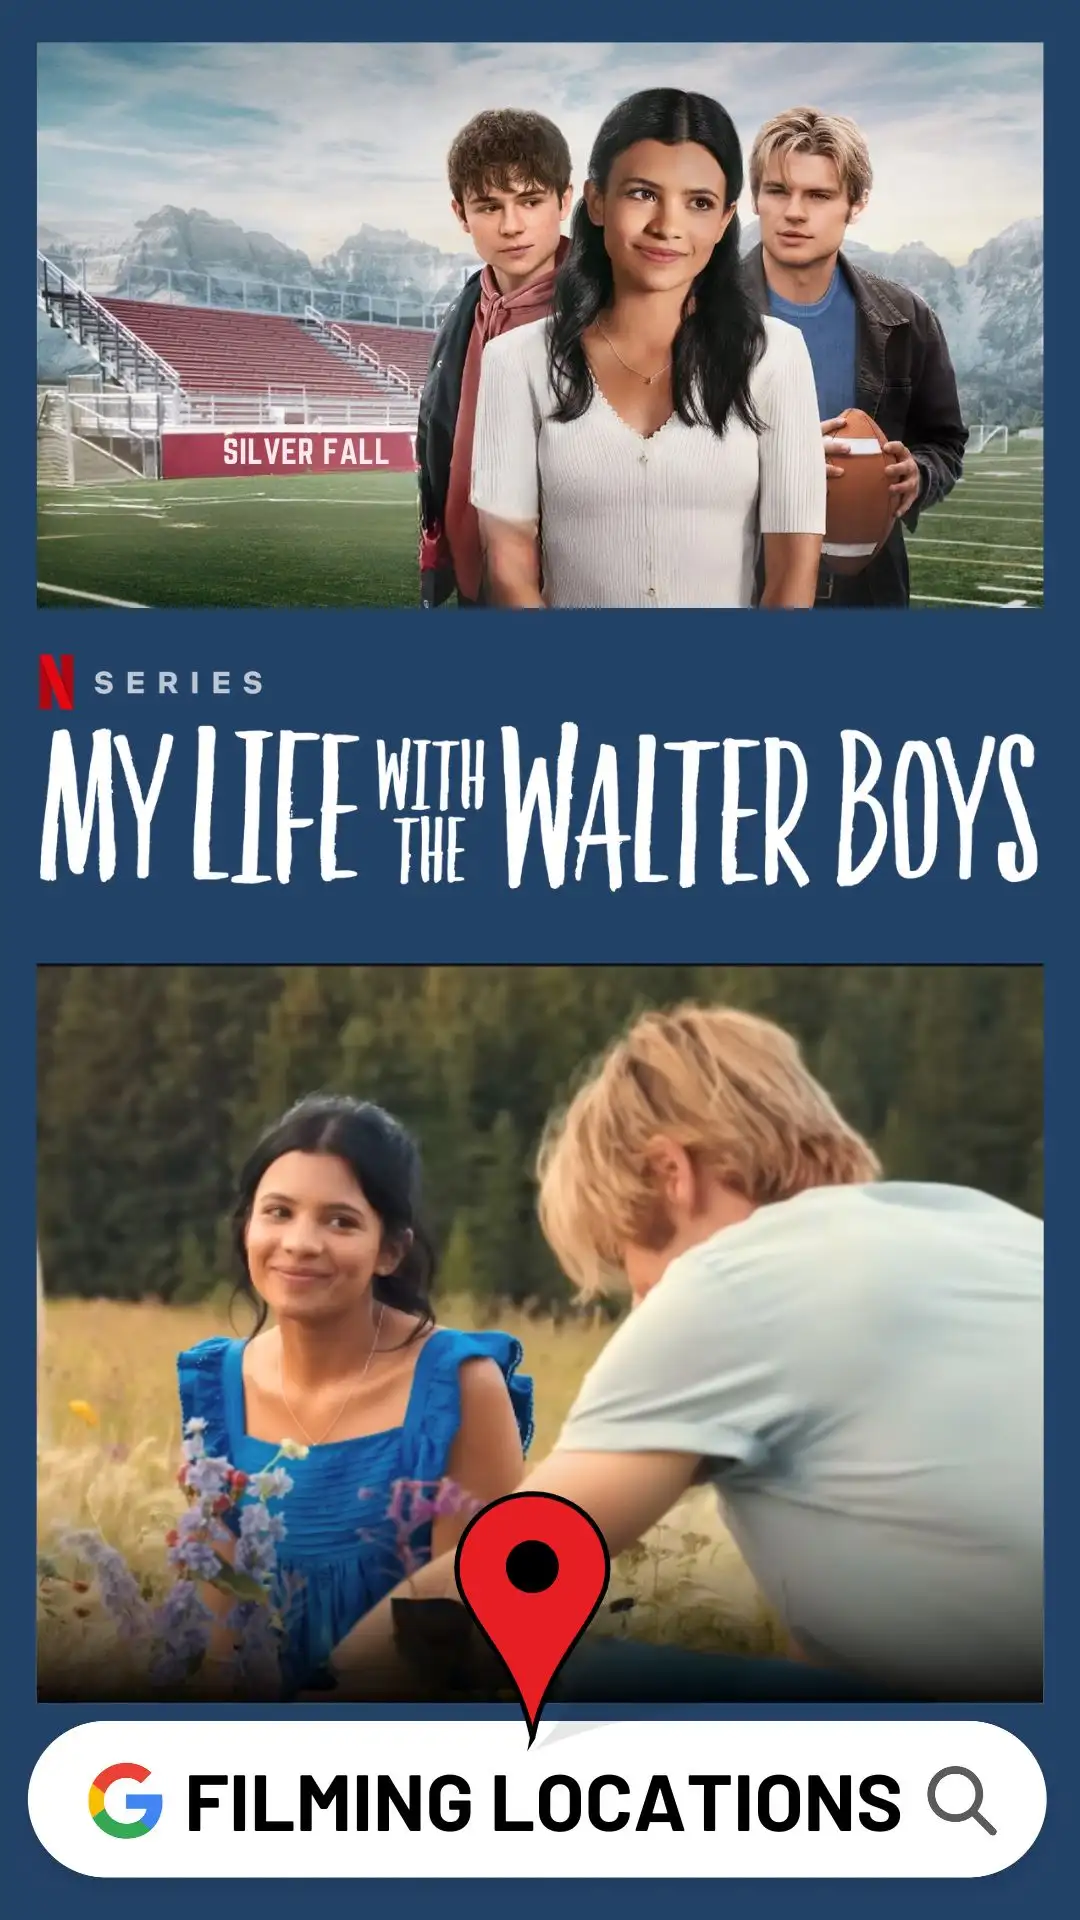 My Life With the Walter Boys Filming Locations